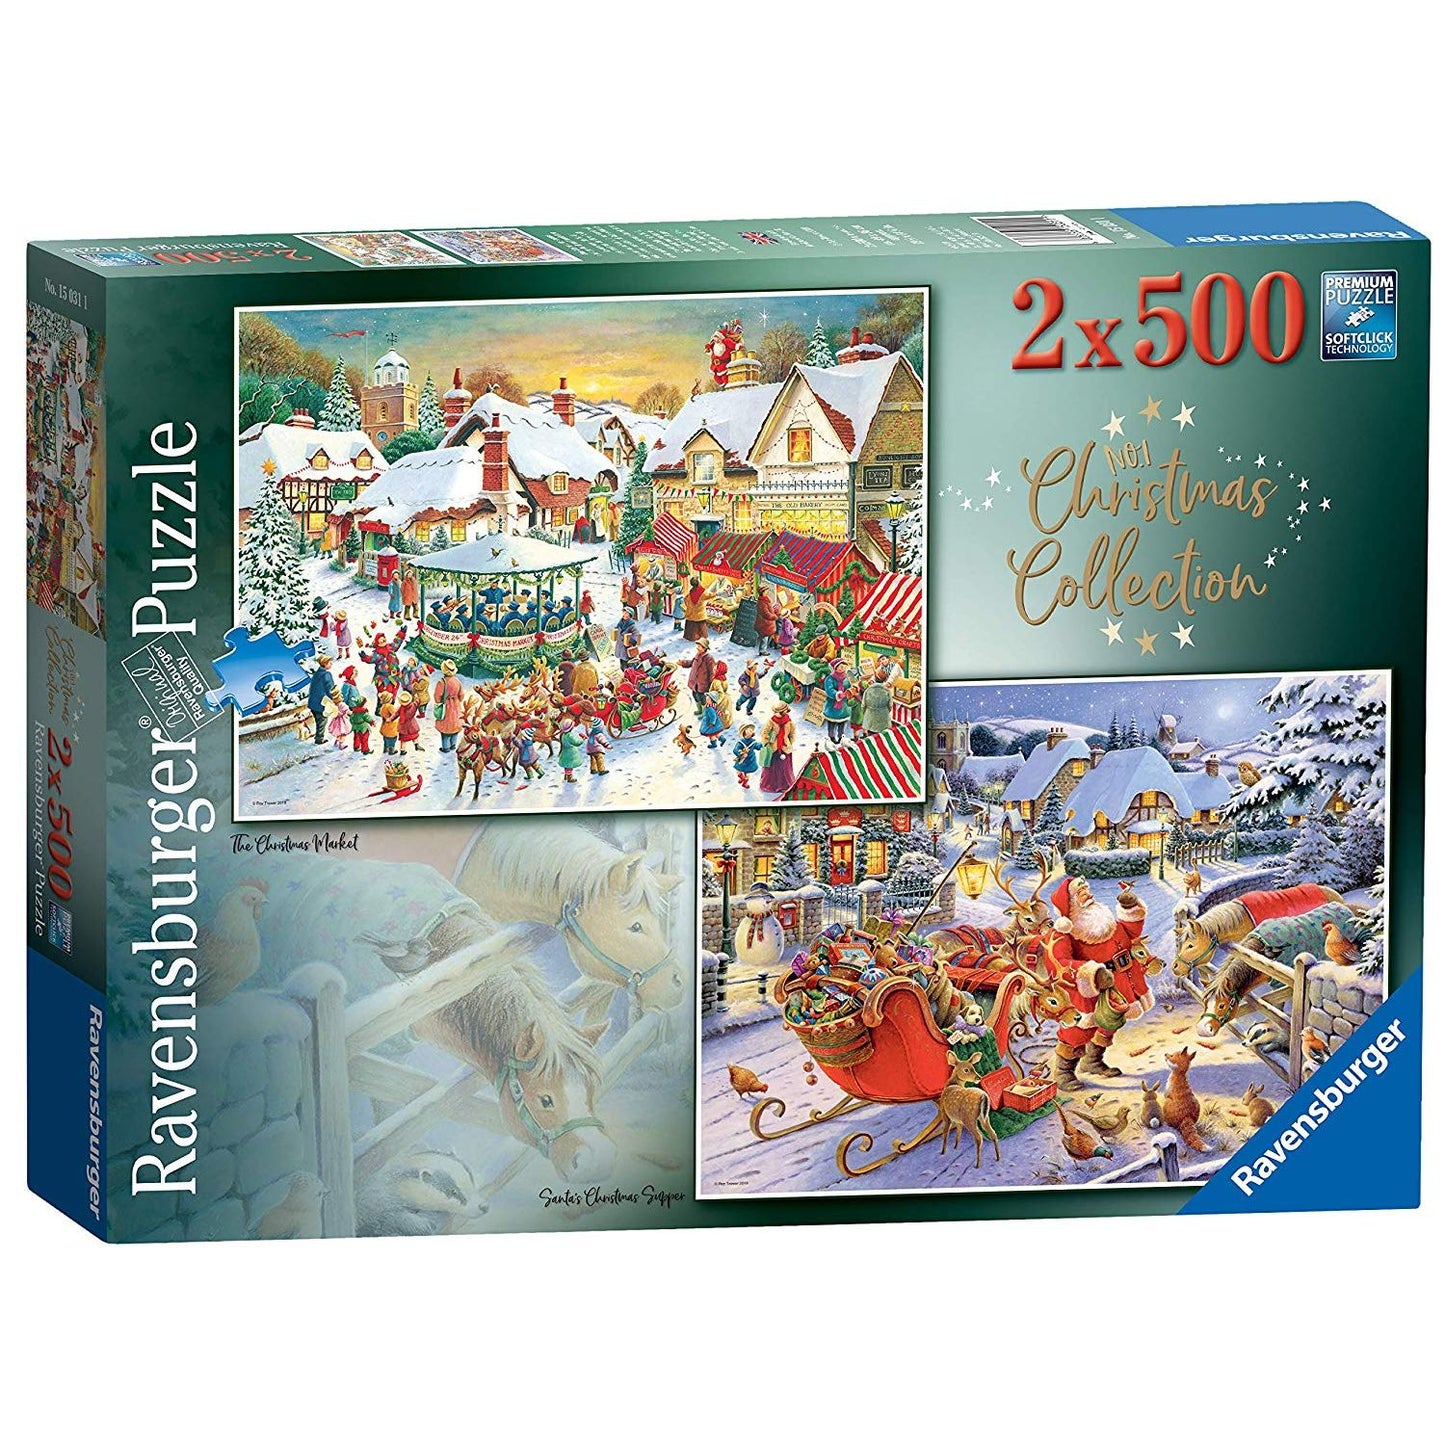 Jigsaw Puzzle - CHRISTMAS COLLECTION - 1000 Pieces